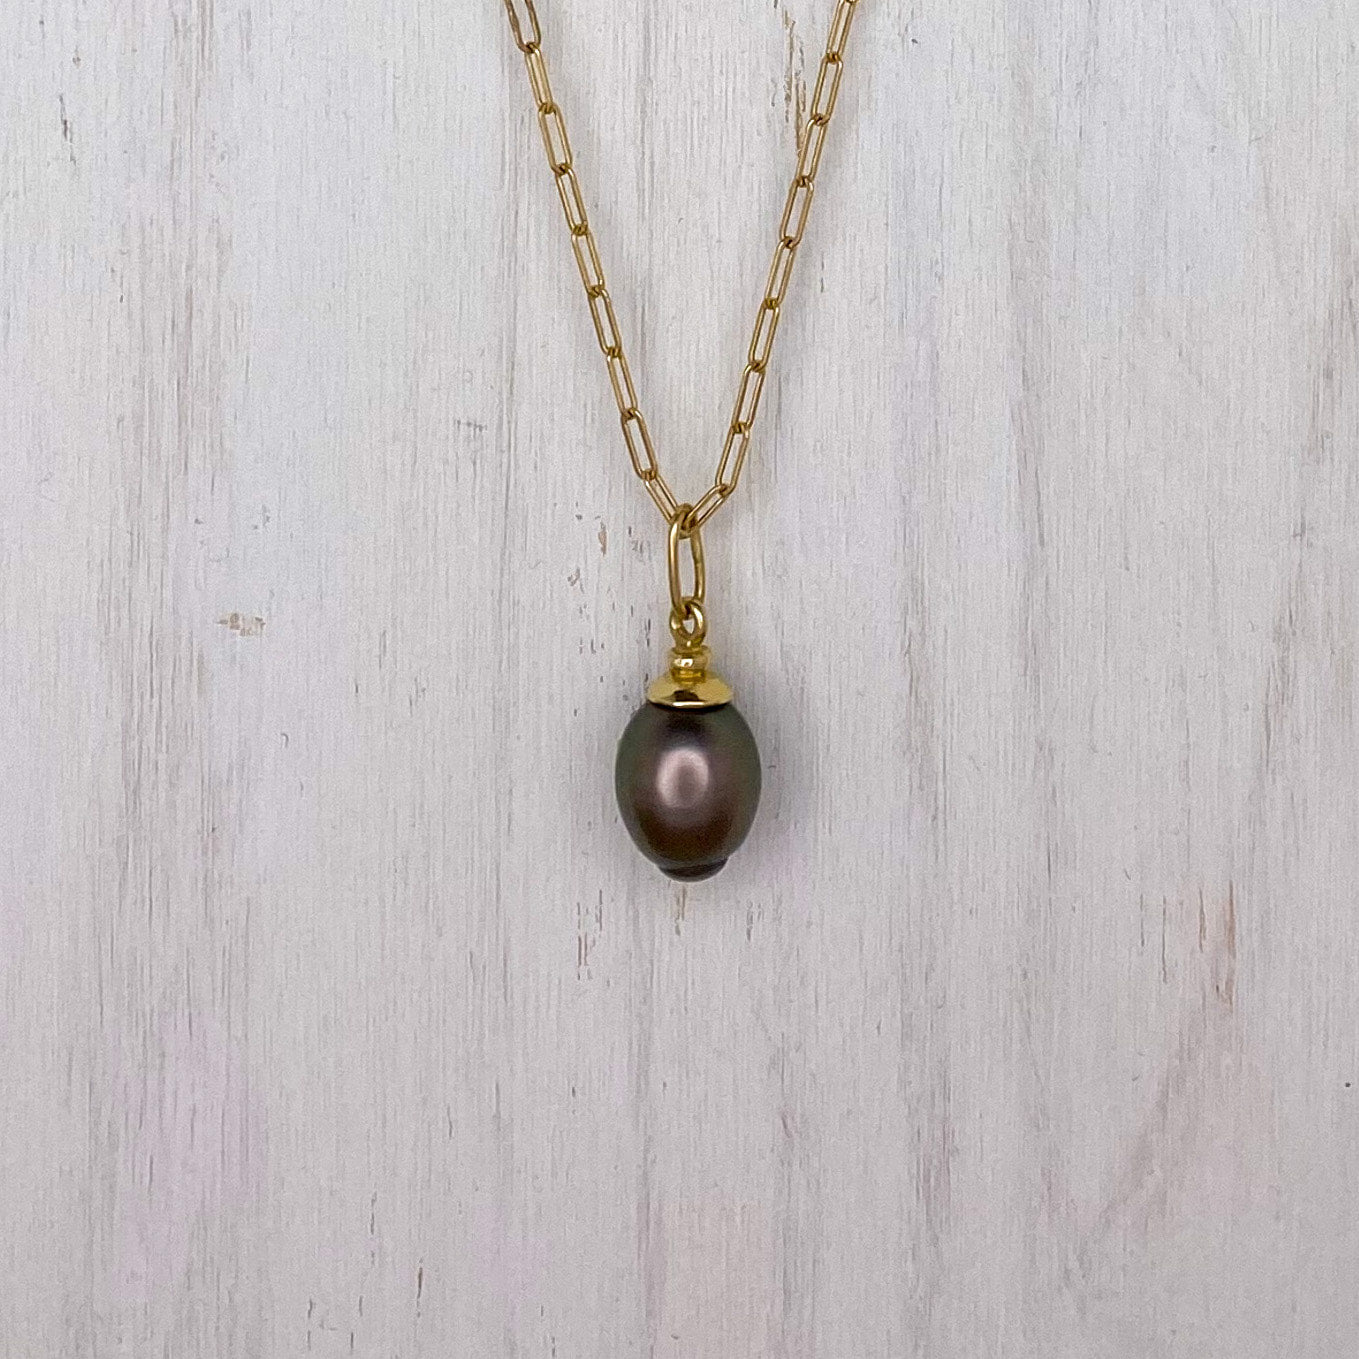 14k gold Tahitian Pearl Necklace, 16" chain